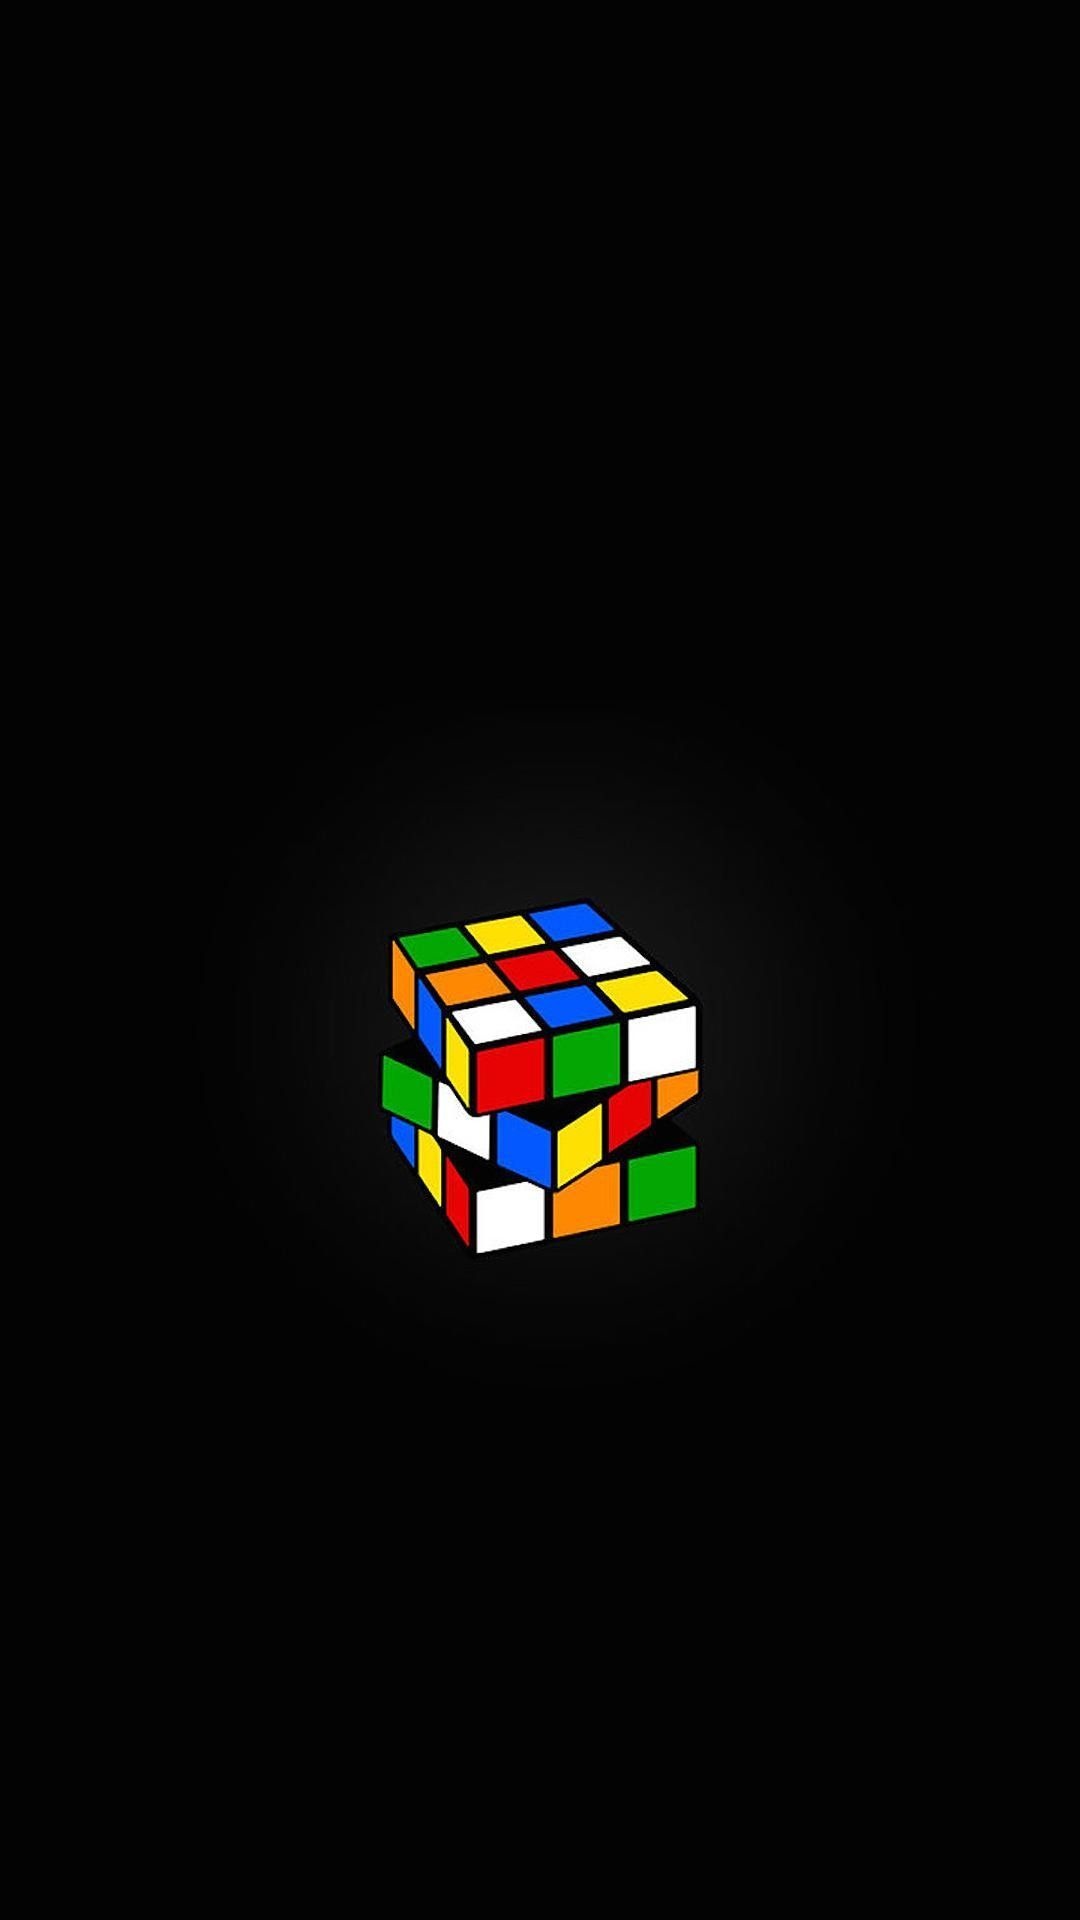 Cube phone wallpapers, Mobile wallpaper, Background, Tablet wallpaper, 1080x1920 Full HD Phone